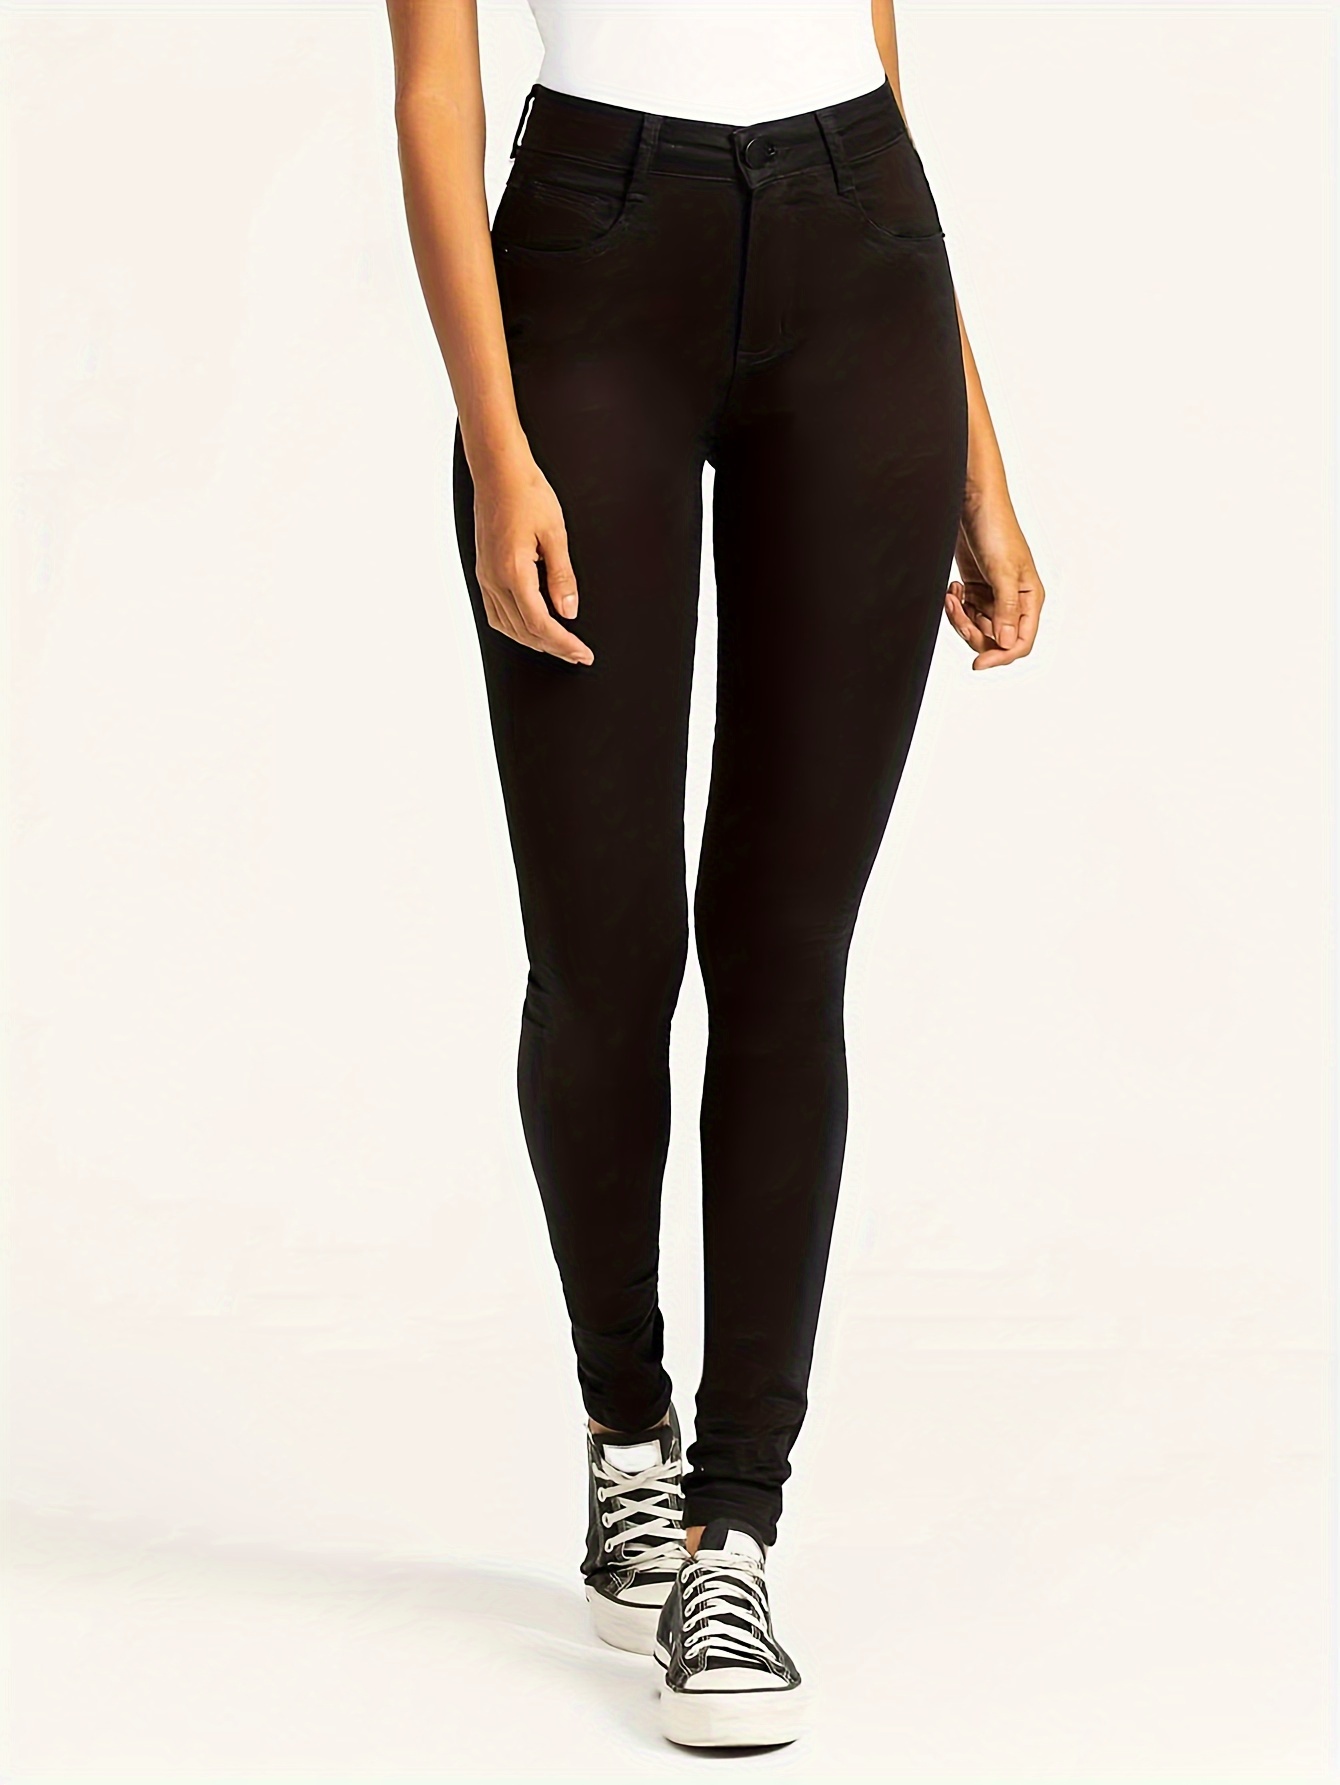 Buy ESS Women's Skinny Fit Cotton Stretchable Ankle Leggings for  Ladies/Girls (2XL, Black) at